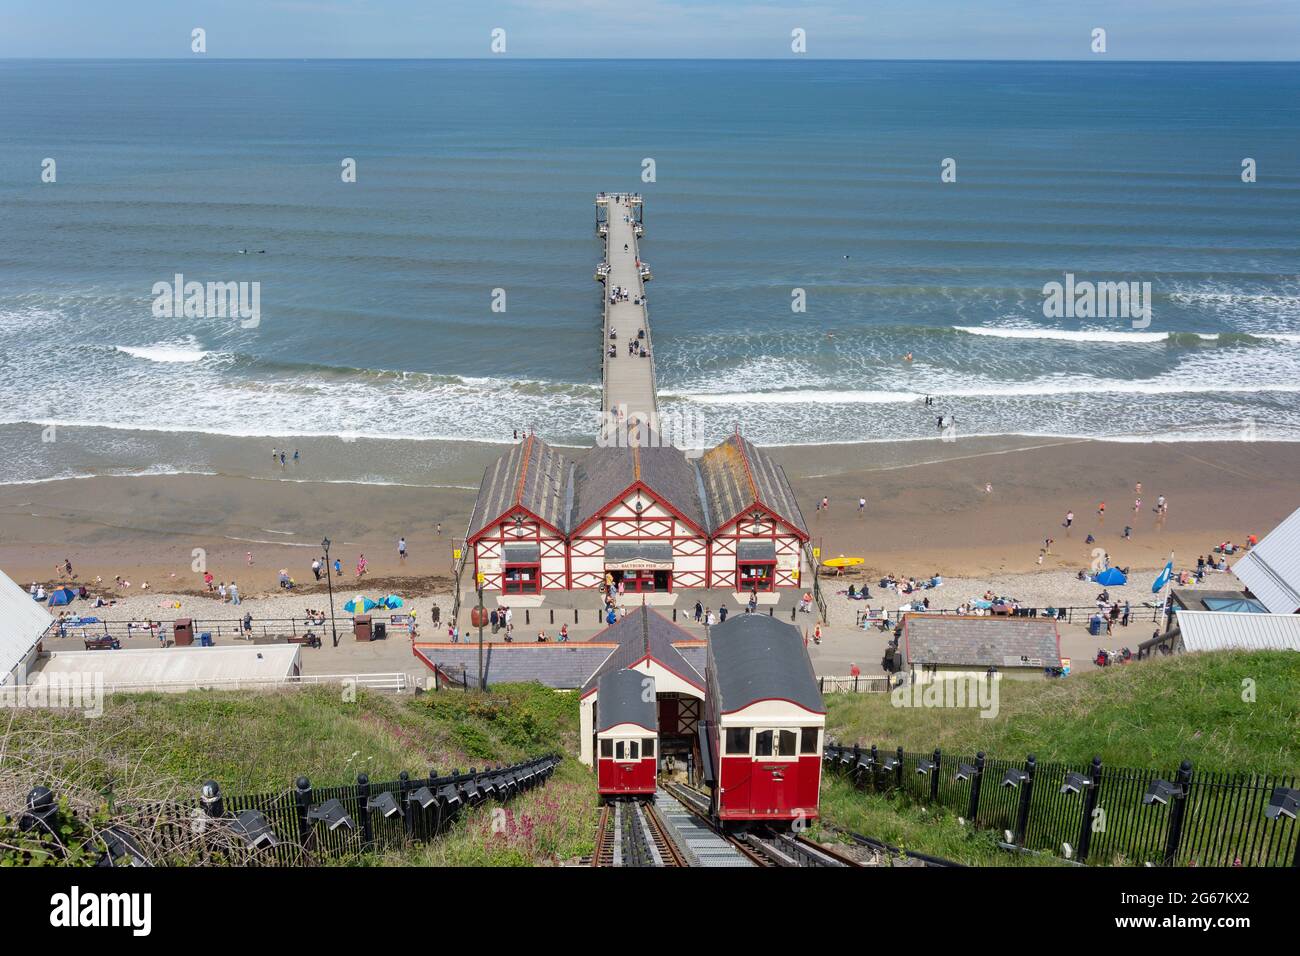 Saltburn Cliff Lift and Pier depuis Upper Station, Saltburn-by-the-Sea, North Yorkshire, Angleterre, Royaume-Uni Banque D'Images